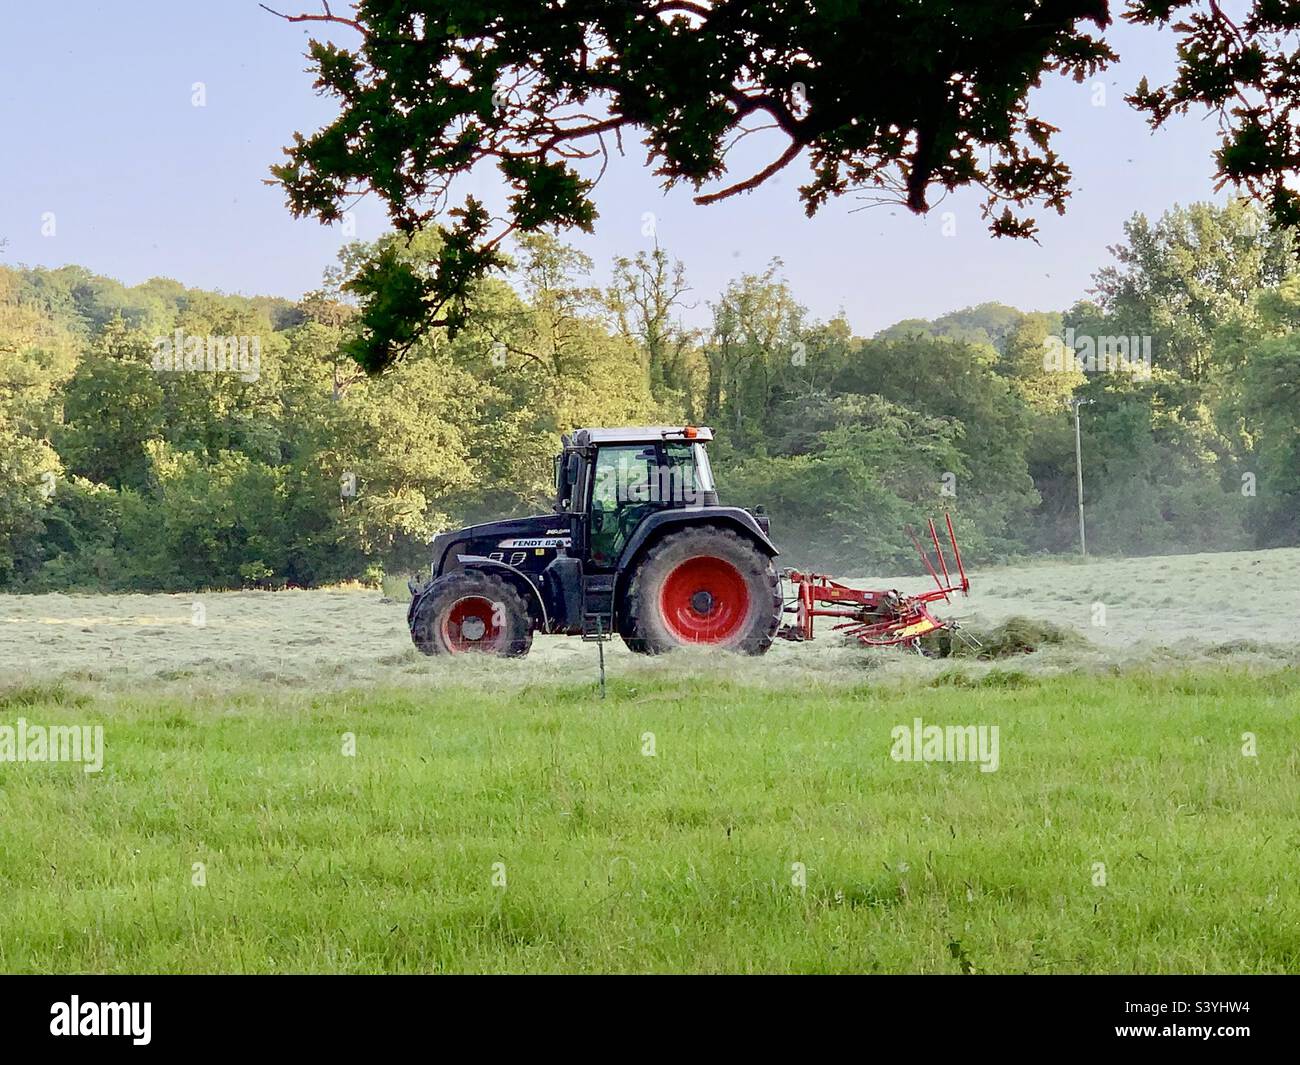 Making hay while the sun shines - a tractor with red wheels rakes over the dry cut grass in the process of Haymaking in summertime, Somerset, England Stock Photo